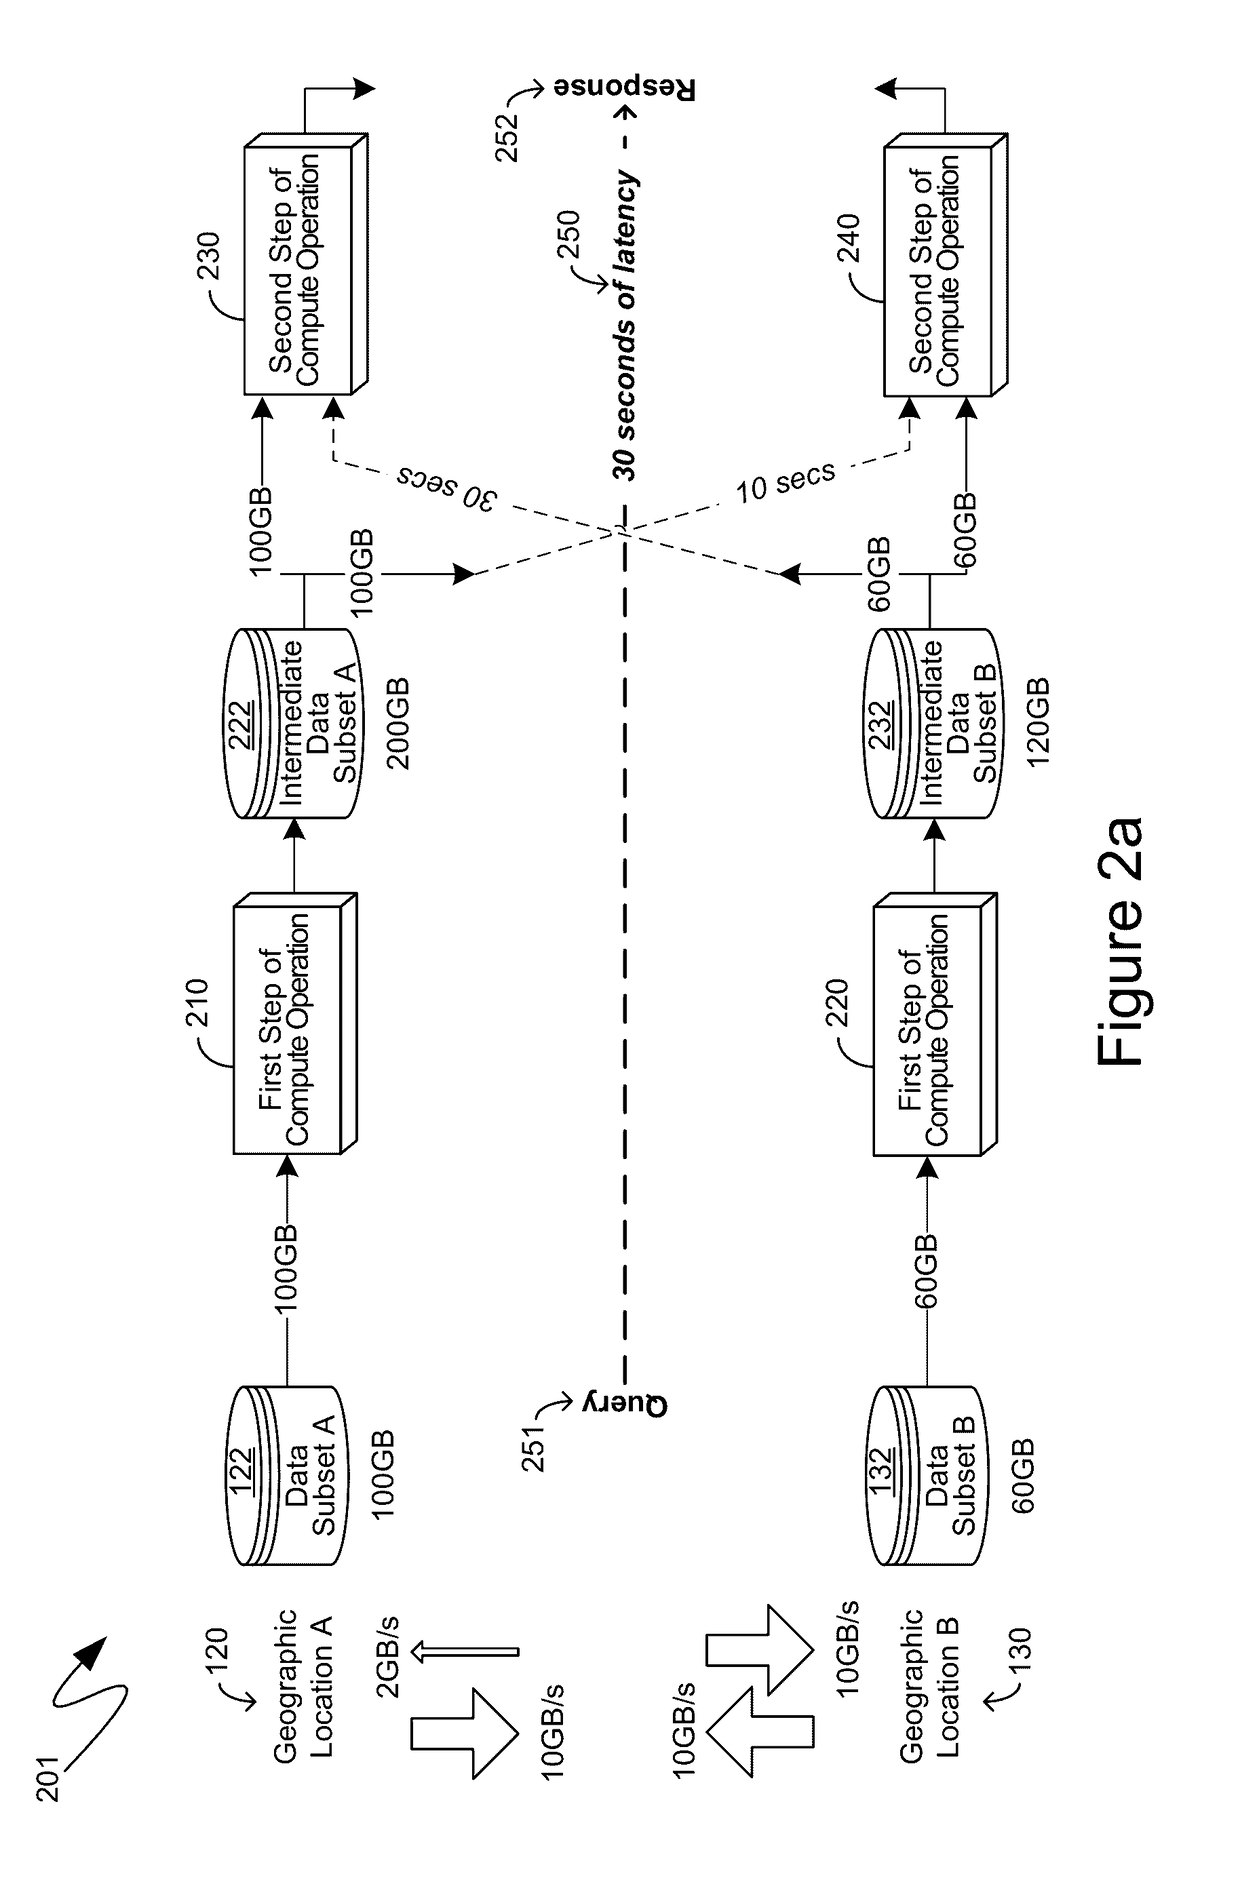 Latency reduction with pre-moving of distributed data and adaptive allocating of compute operations